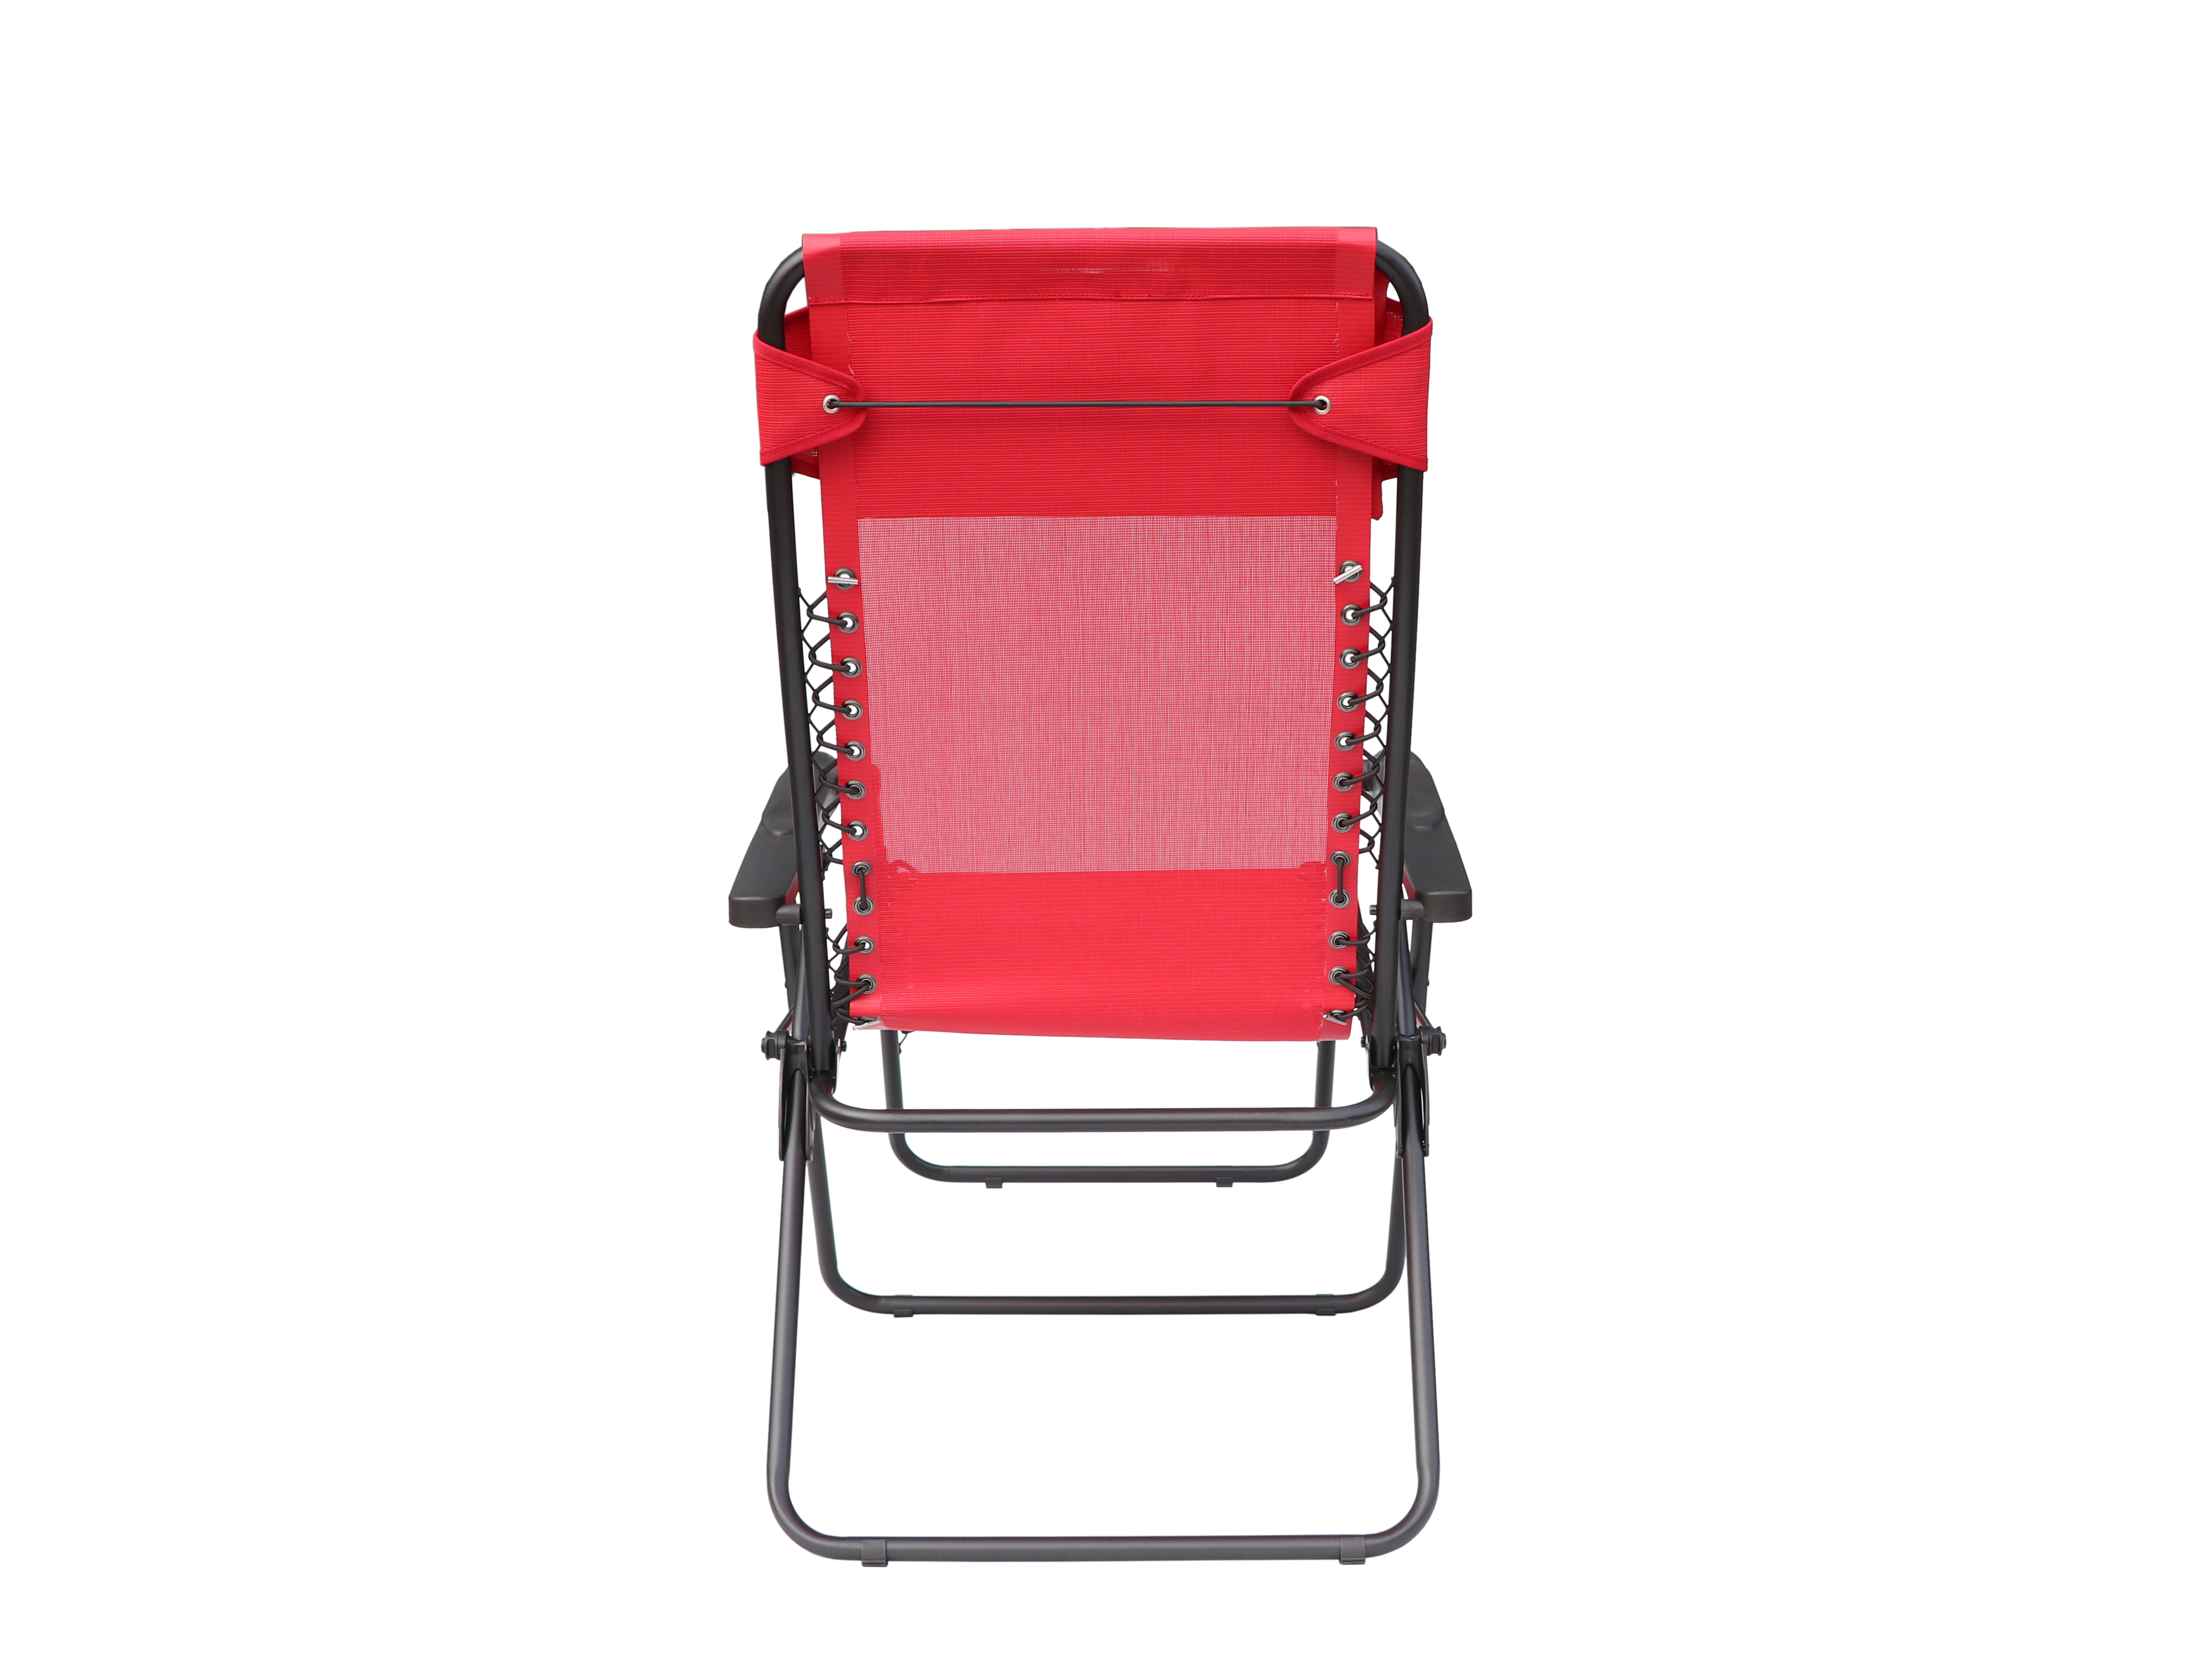 Mainstays Zero Gravity Bungee Lounge Chair - Red - image 4 of 8